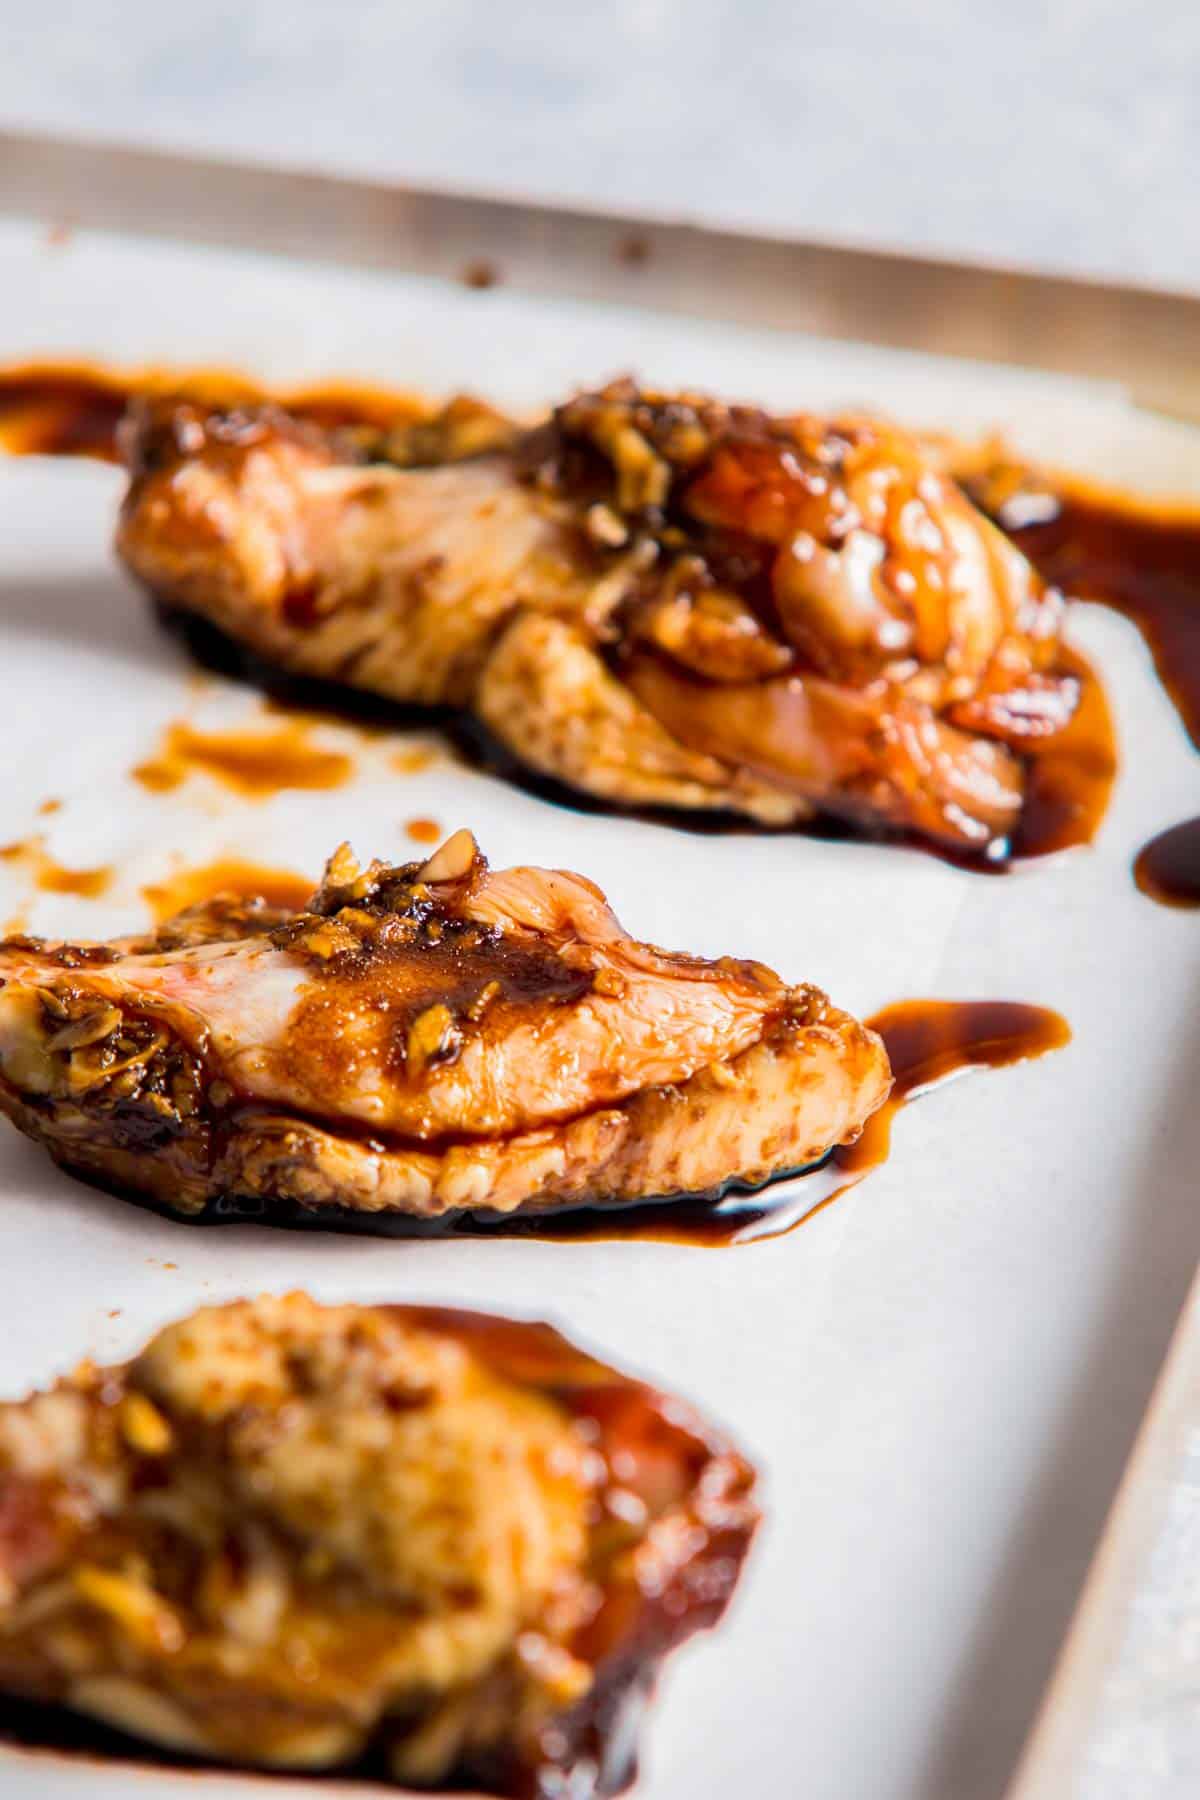 chicken wings in a brown sauce on a baking sheet